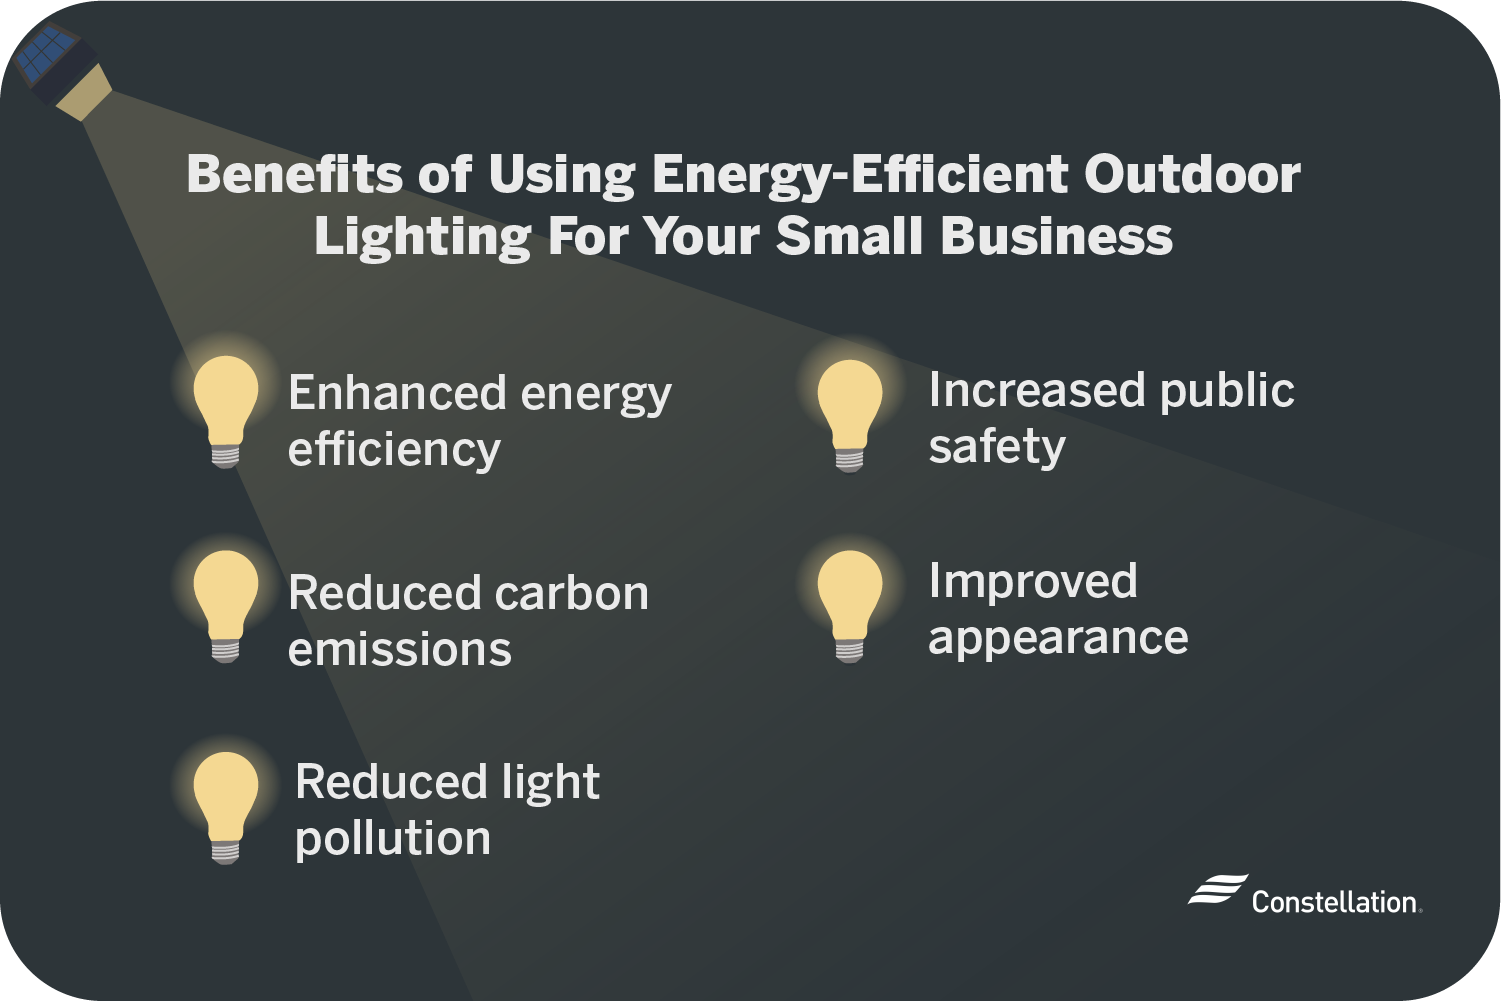 Benefits of energy-efficient outdoor lighting include enhanced energy-efficiency, safety, appearance and reduce carbon emissions and light pollution